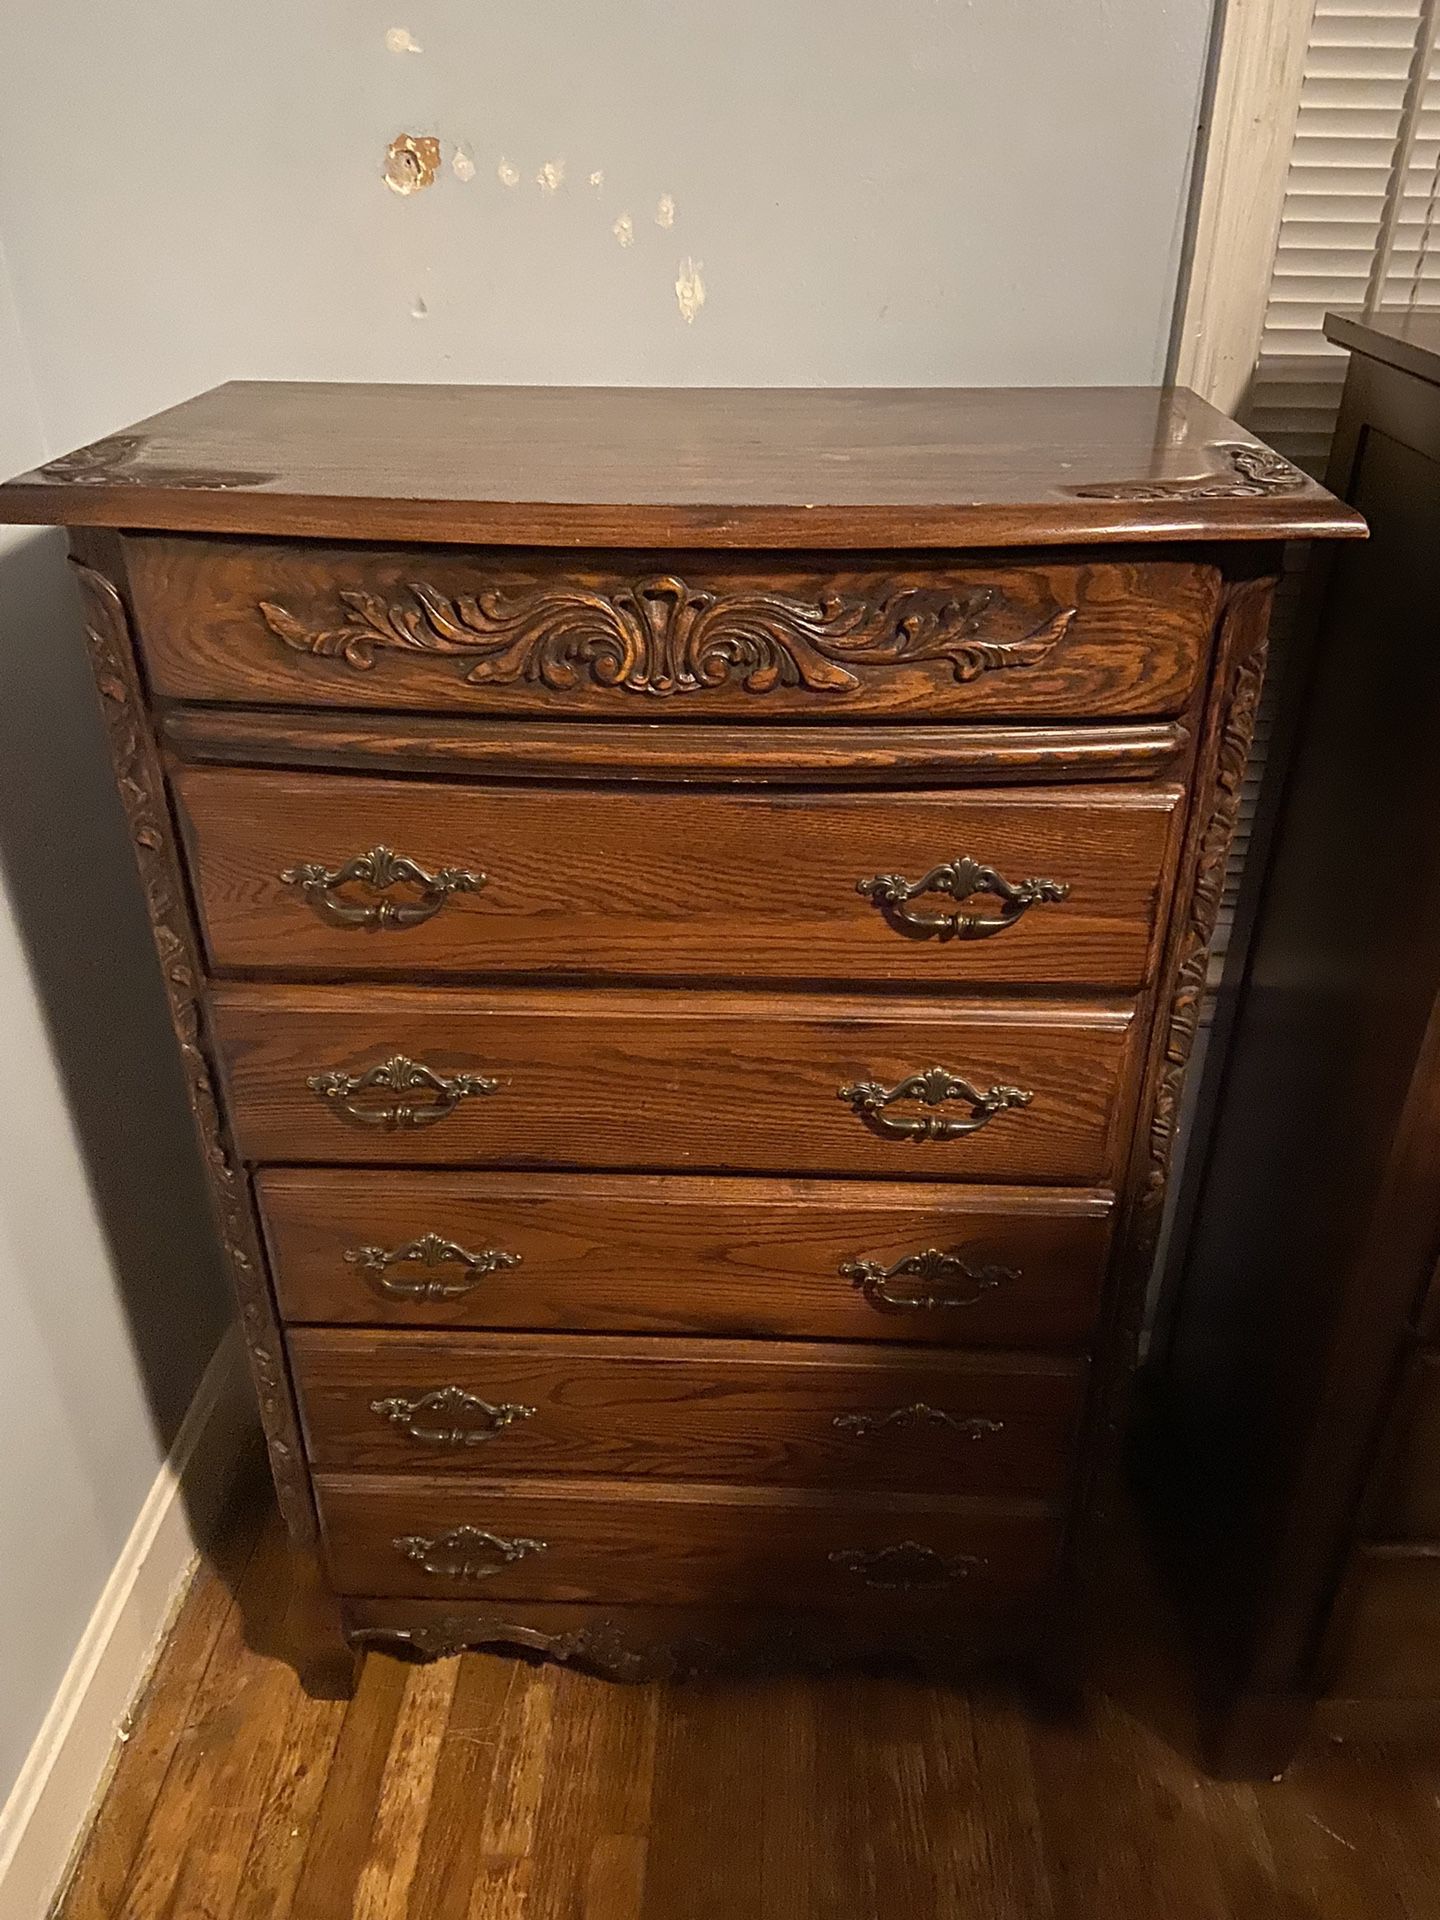 Five drawer, dresser with jewelry box and mirror